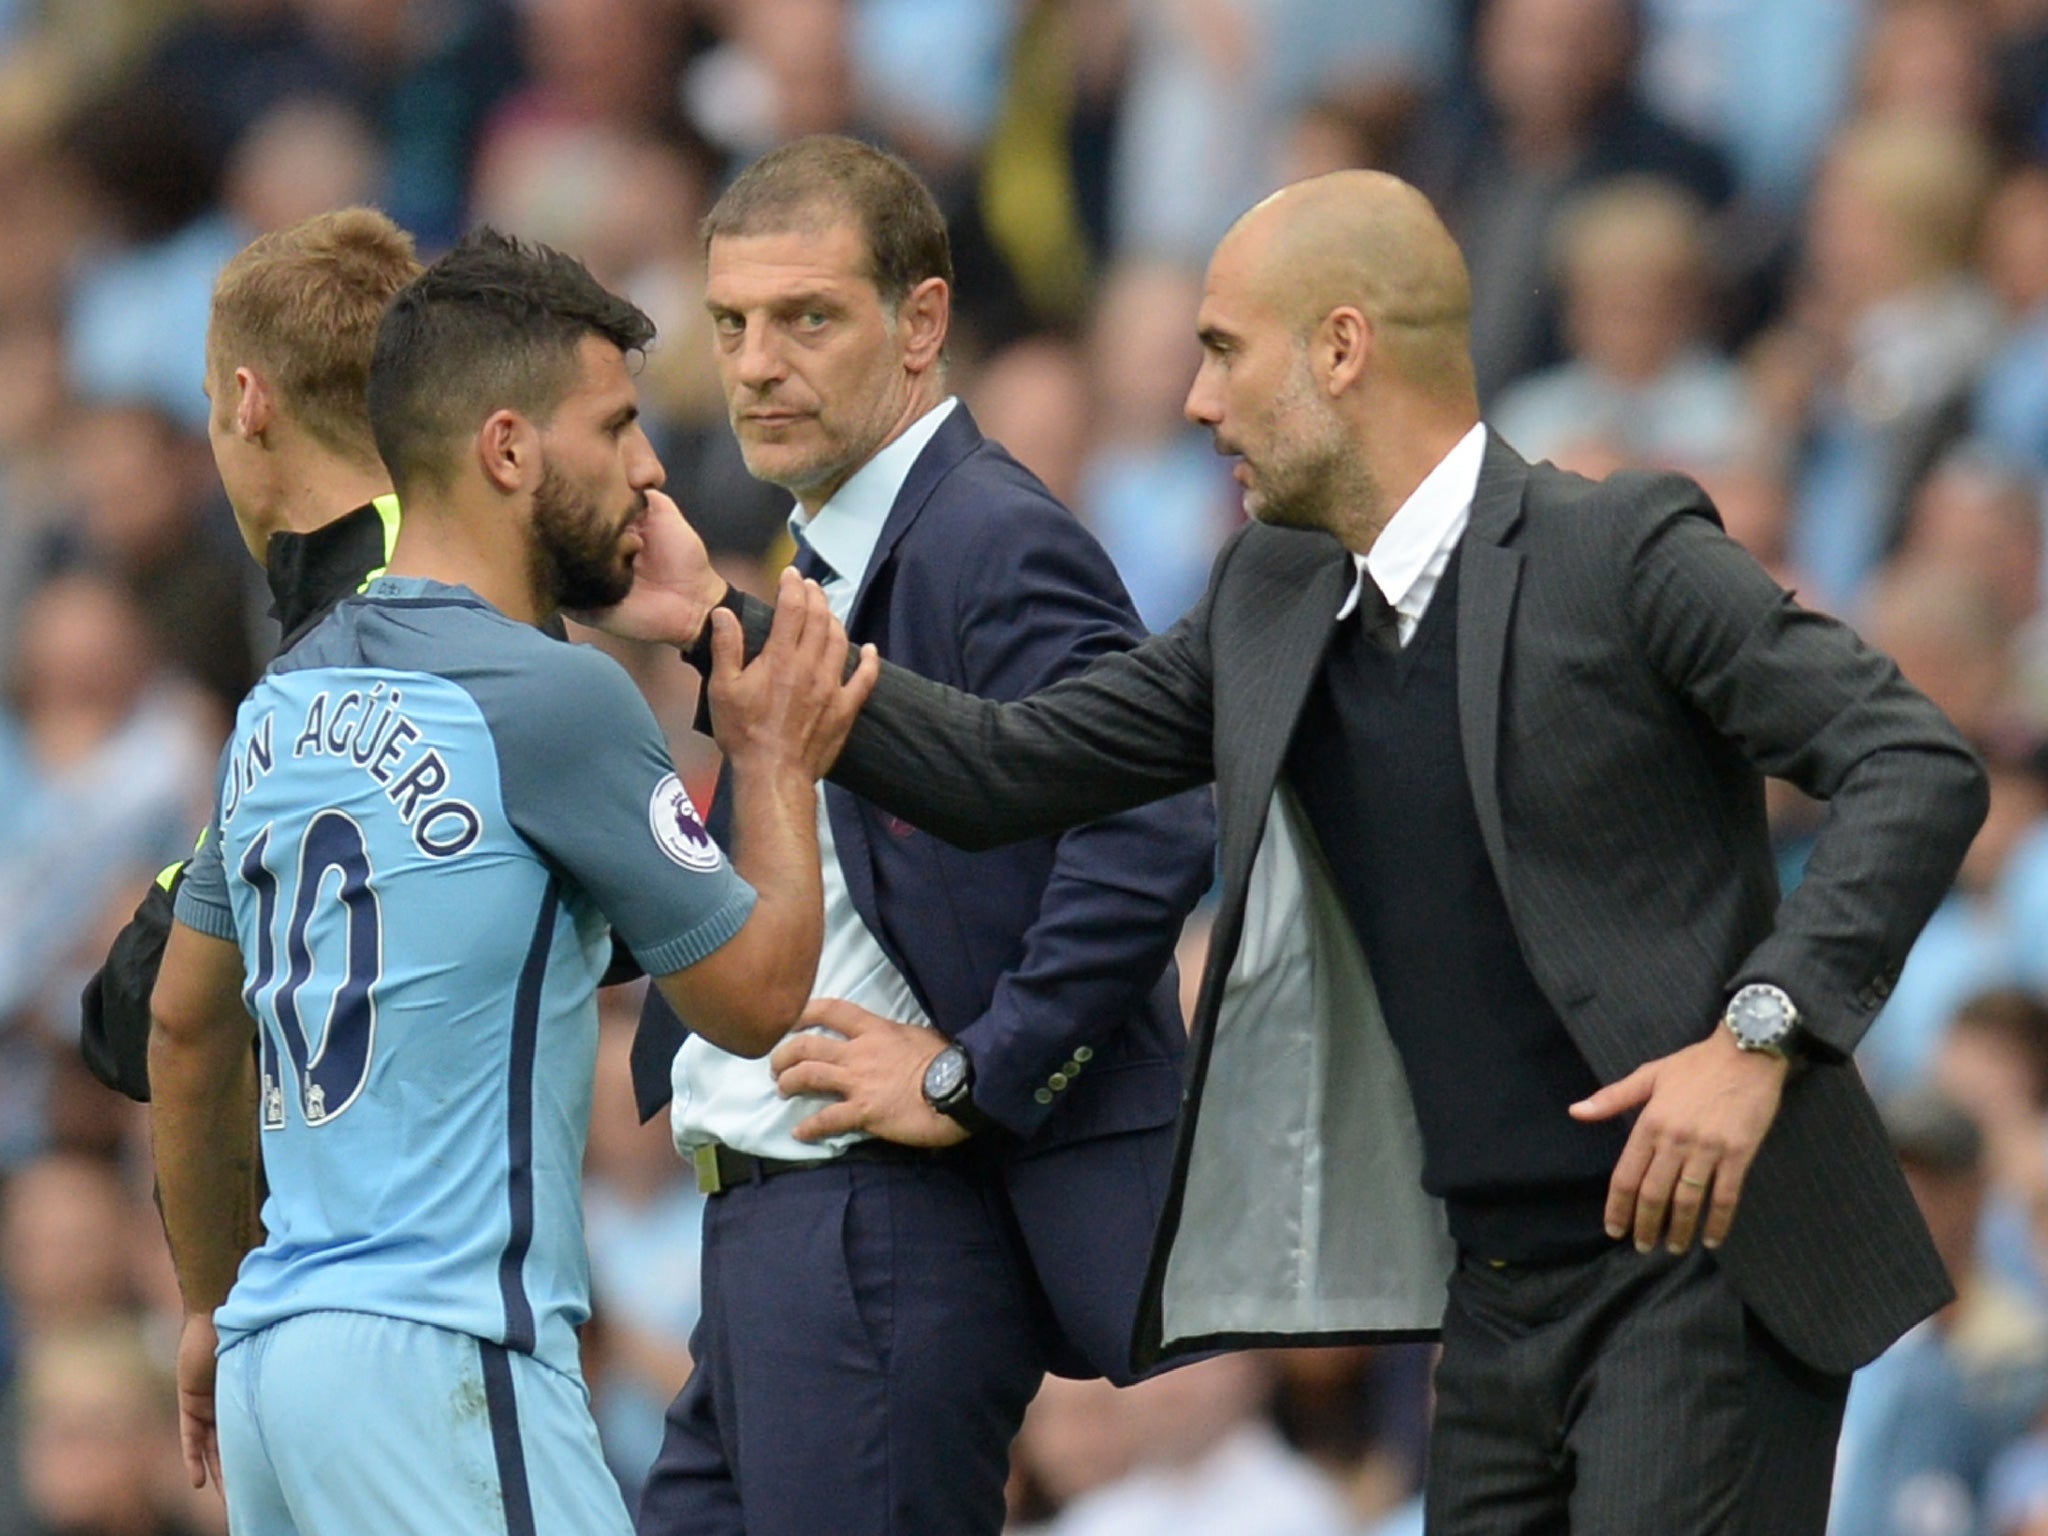 Guardiola acknowledges Aguero as he leaves the Etihad pitch